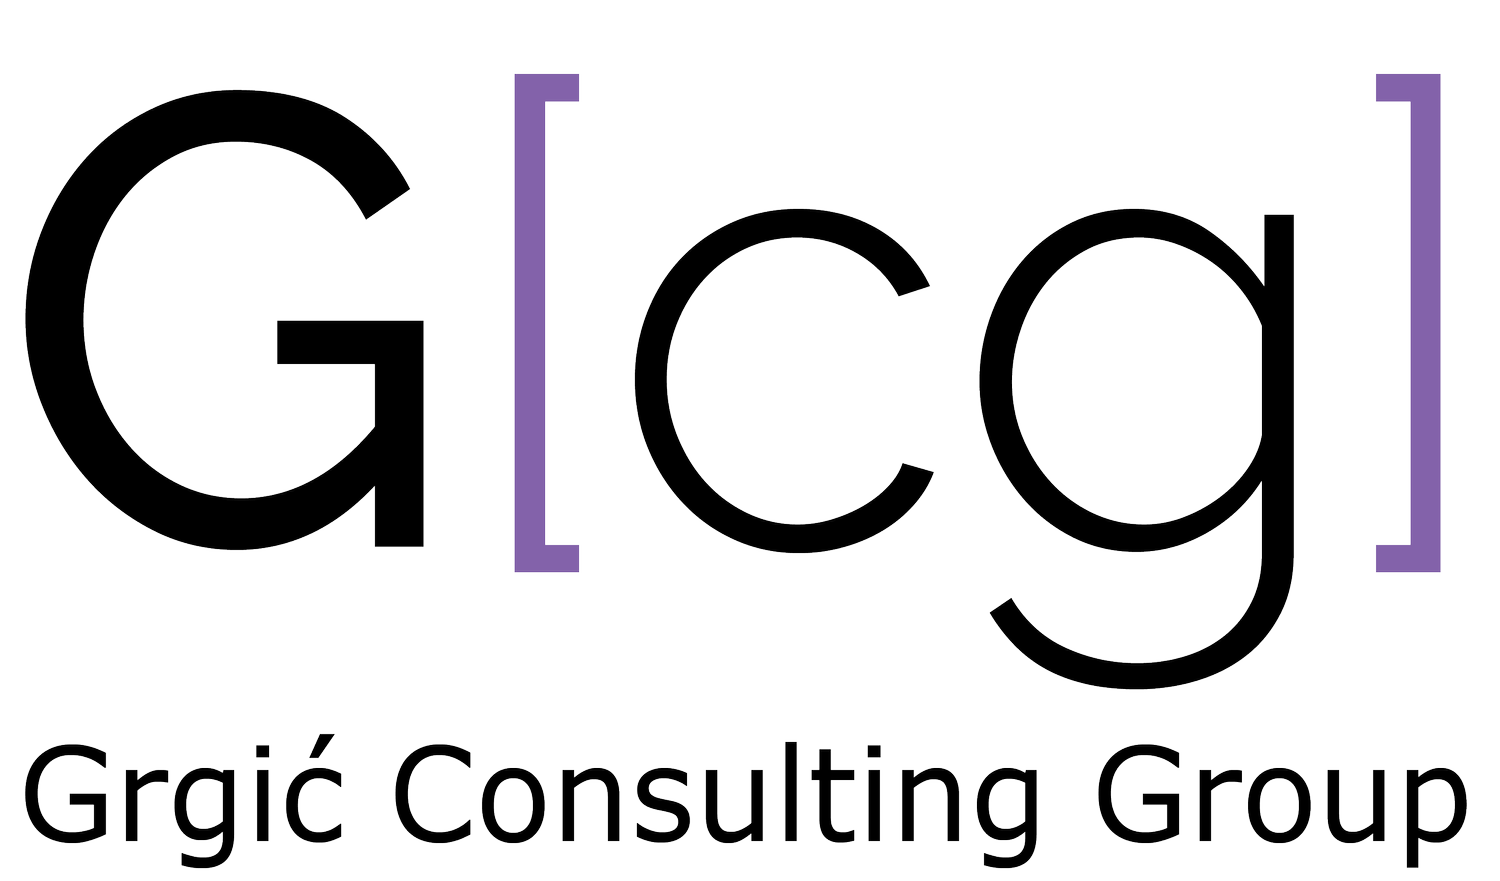 Grgic Consulting Group